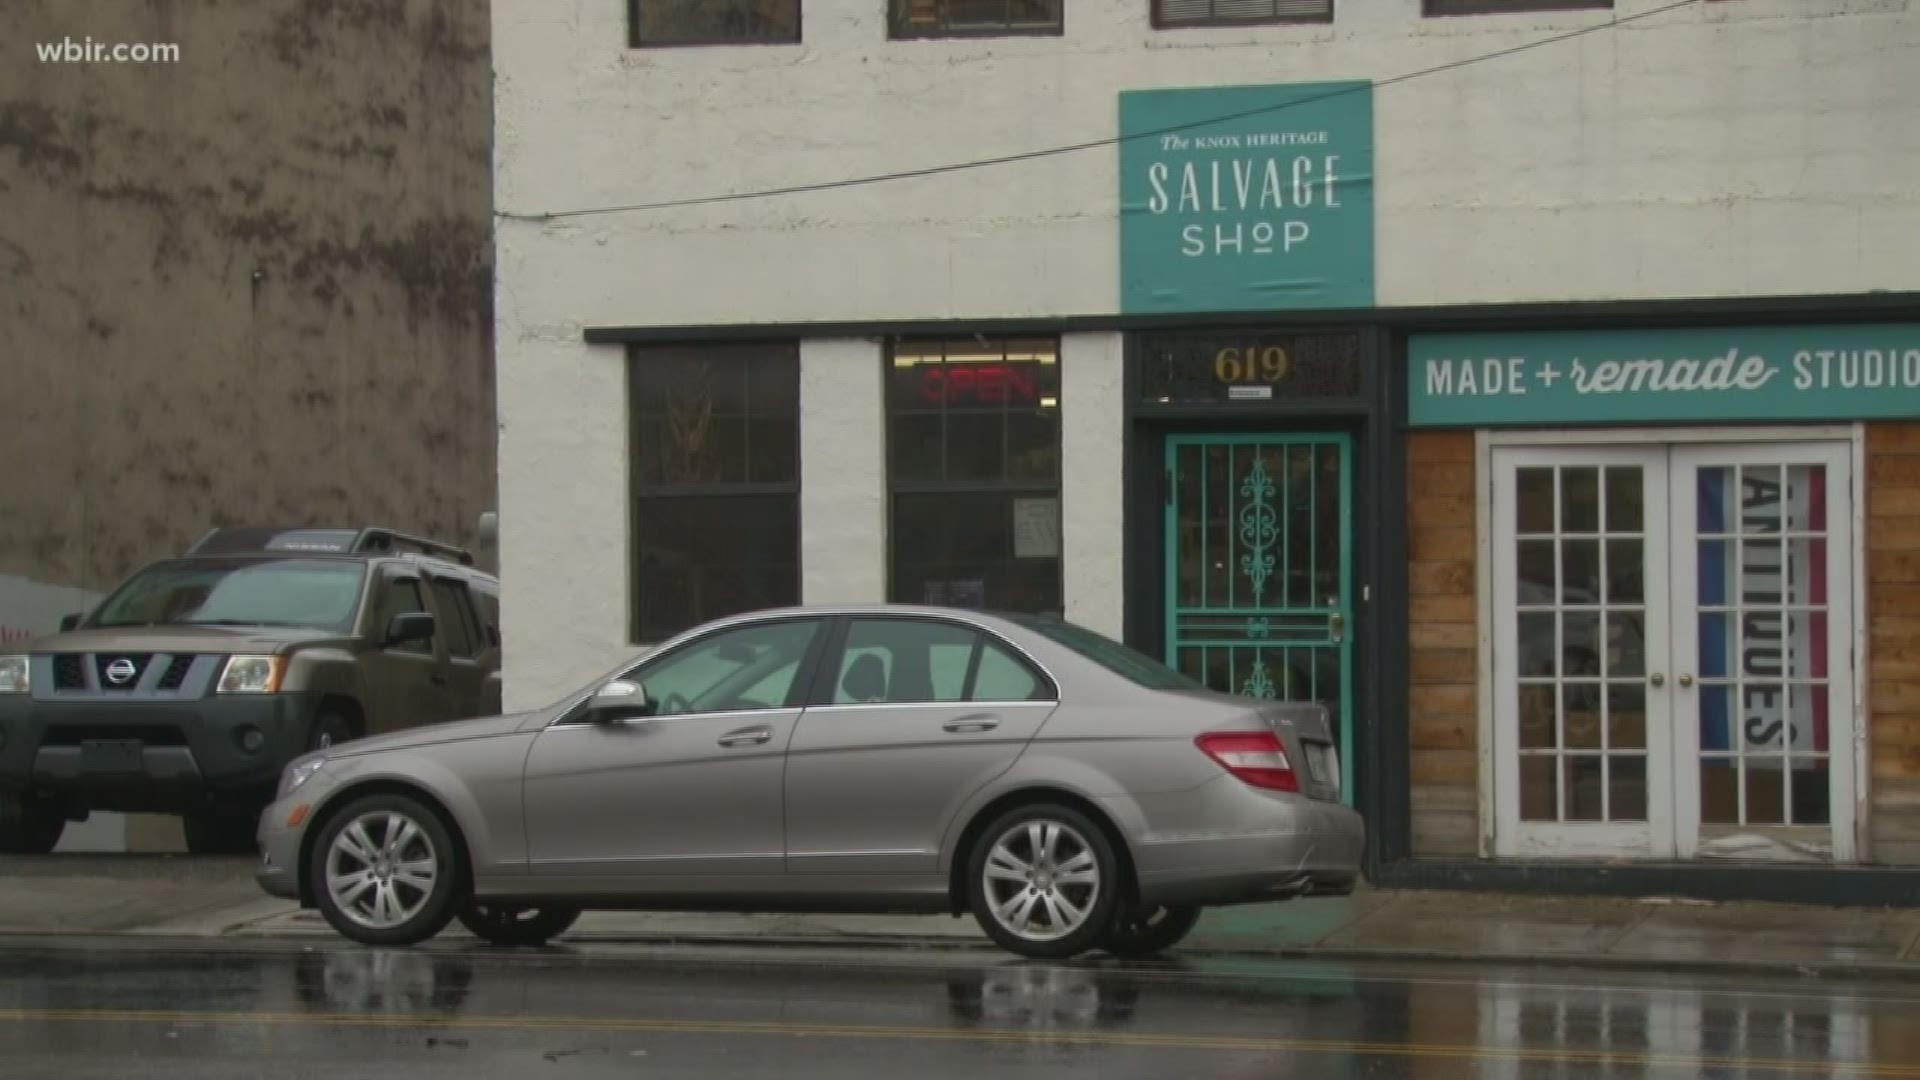 The business's managers say the Salvage Shop Revival will open on Jan. 25.